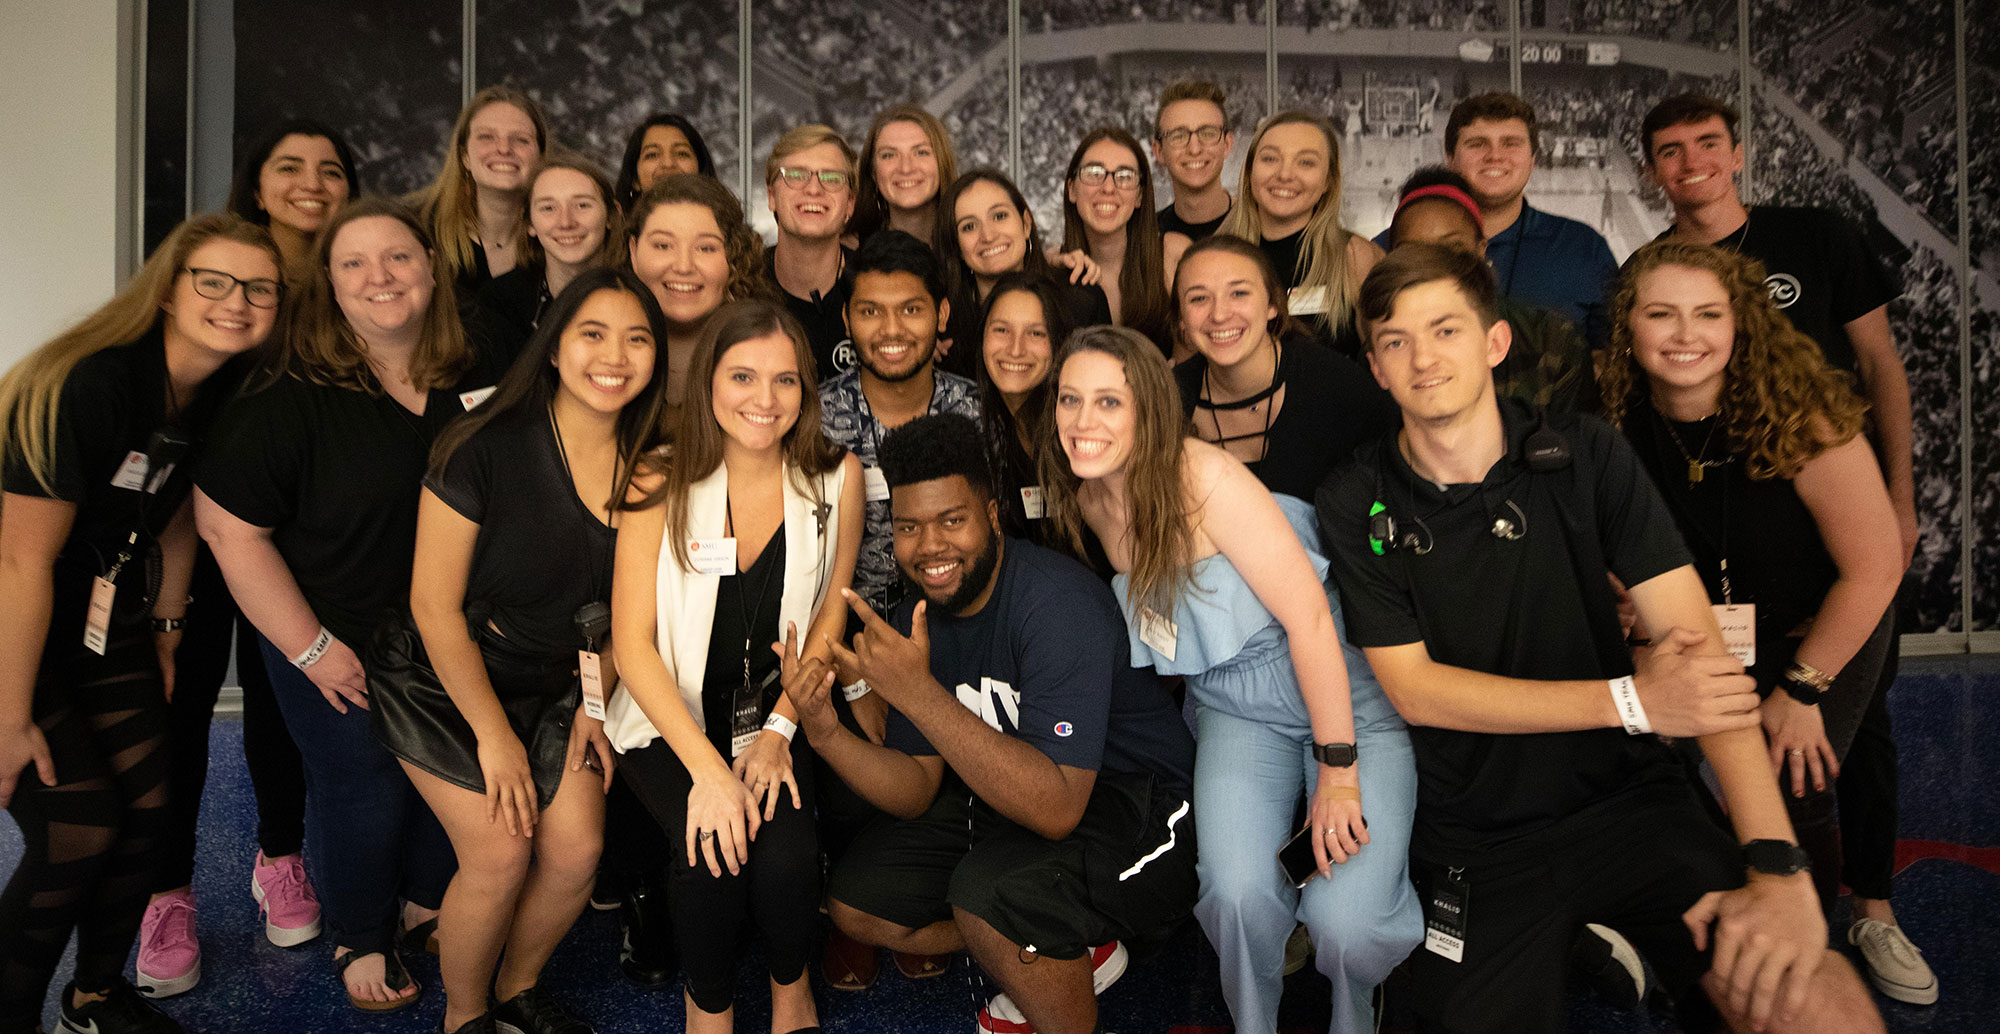 Logan and members of SMU’s Program Council with Khalid after his on-campus performance